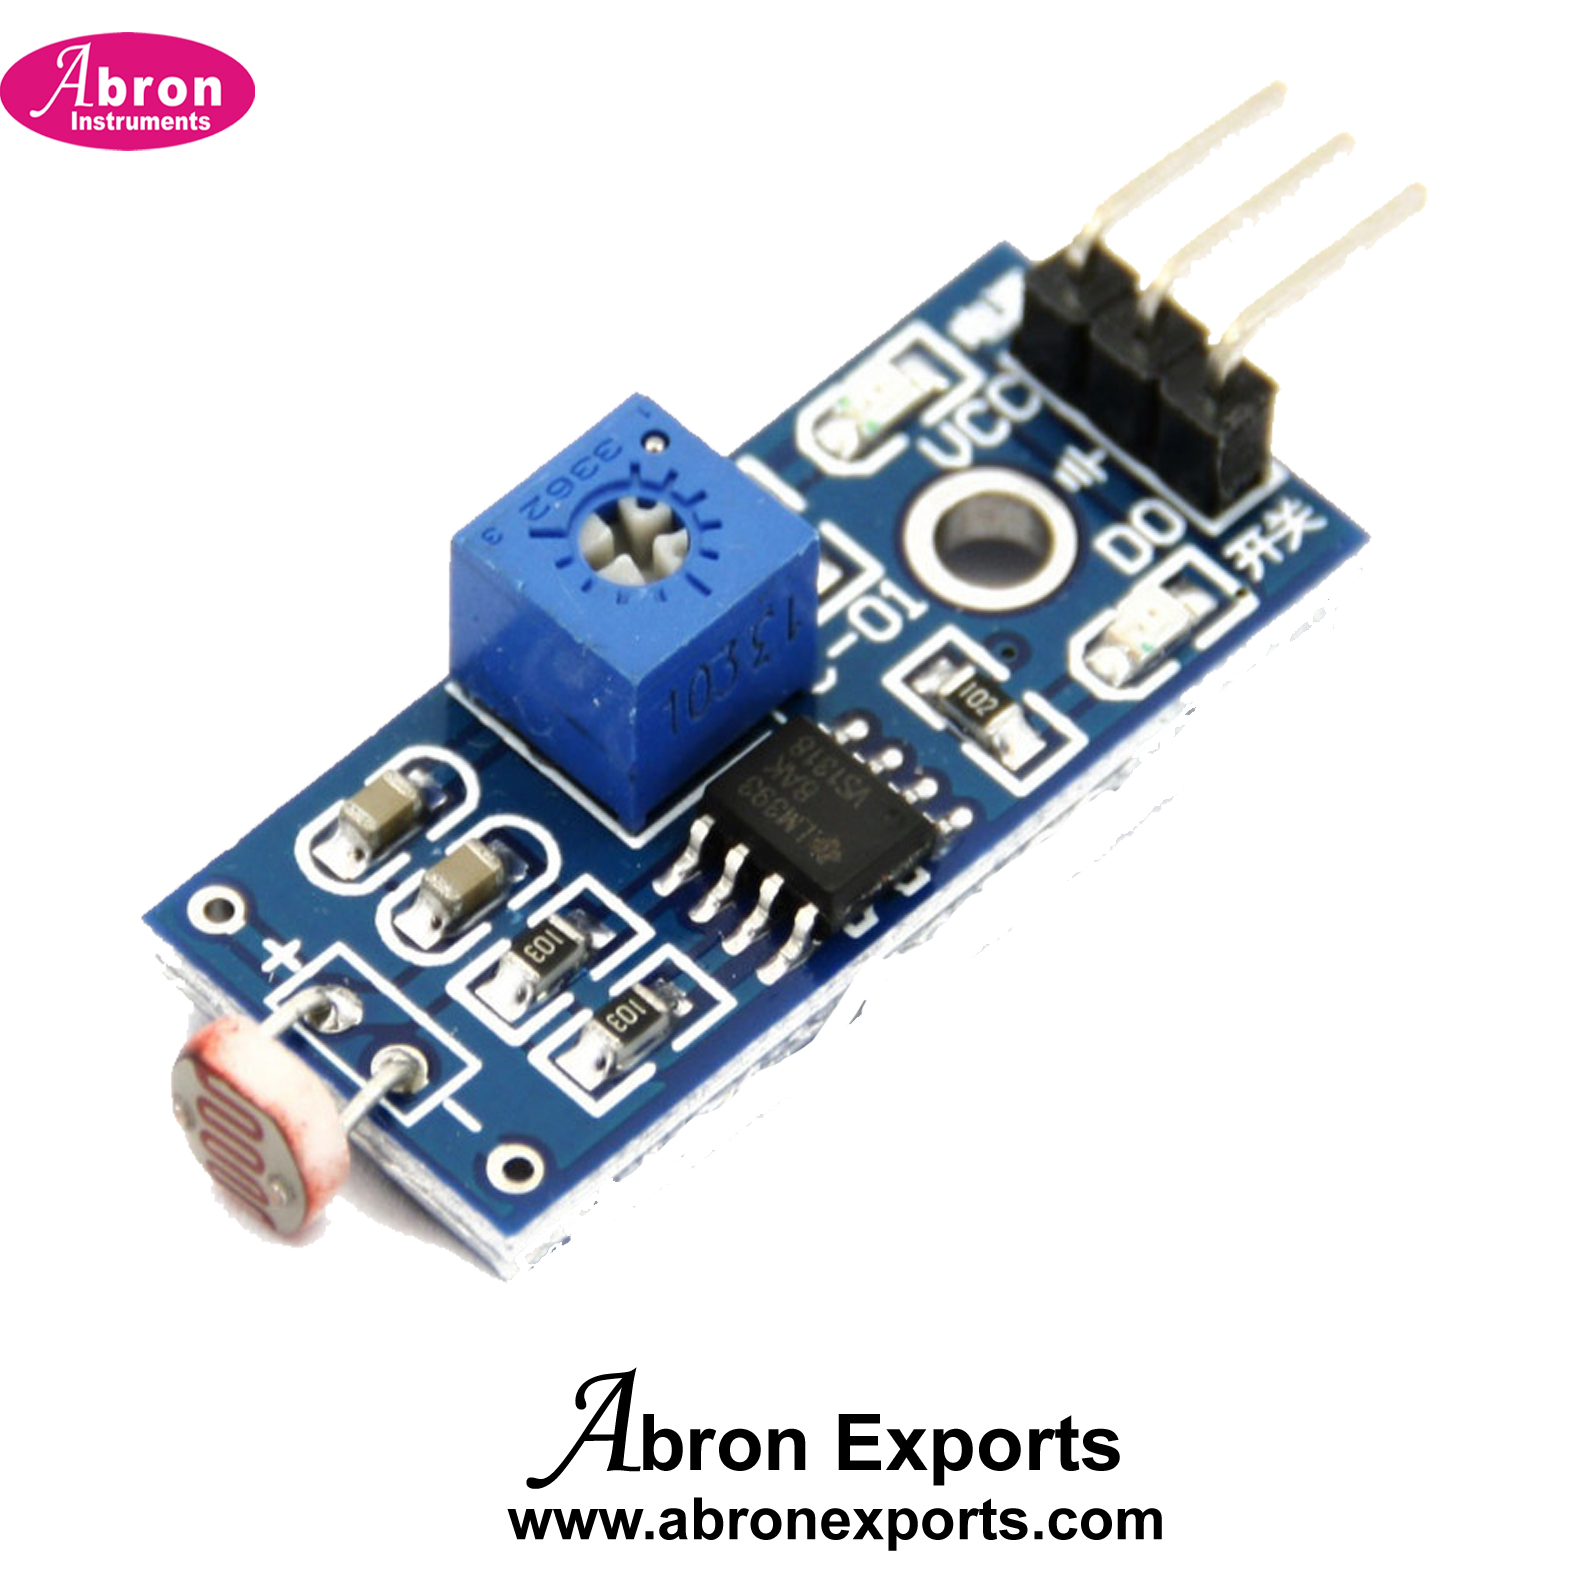 Electronic Curcit Spare Light Sensor With Plate Bread Board Connector Abron AE-1224SLT 